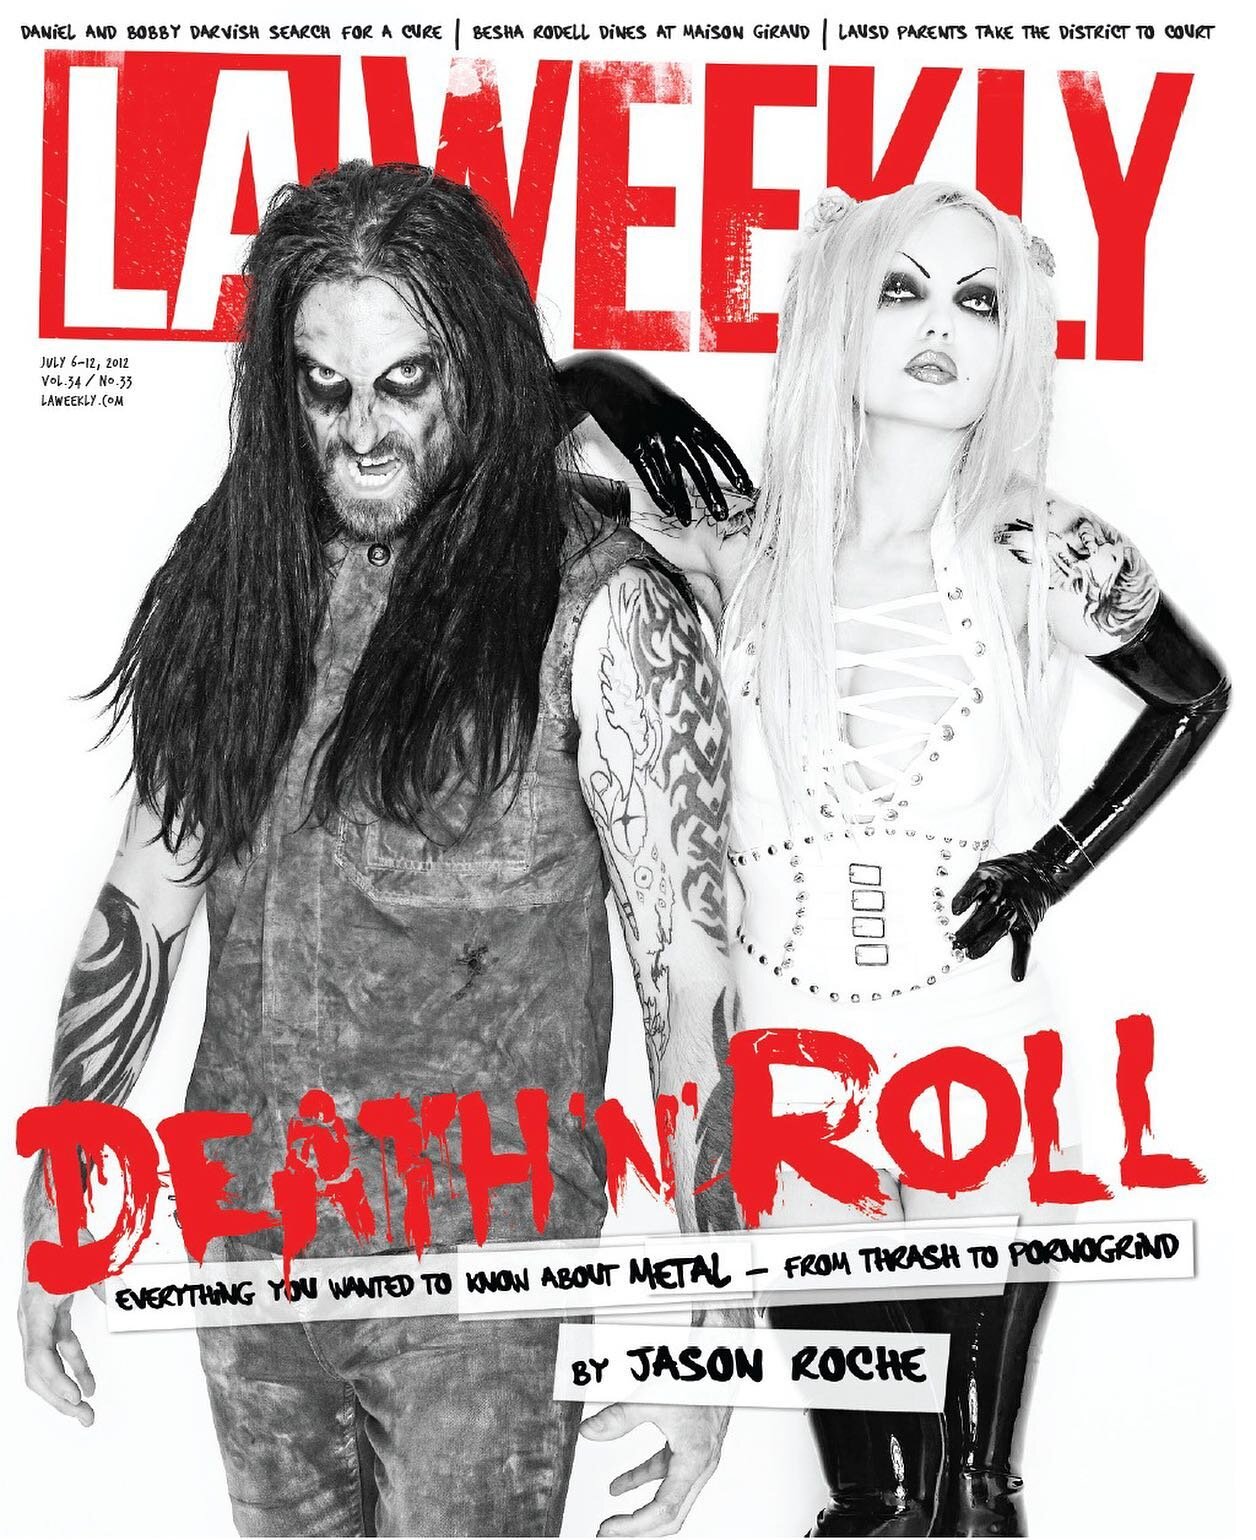 Flashback to another LA Weekly cover design. METAL! Feature story by Jason Roche. Photography by Barry Fontenot.

#metal #rock #music #heavymetal #metalhead #deathmetal #metalmusic #blackmetal #metalband #laweekly #coverdesign #altweekly #losangeles 